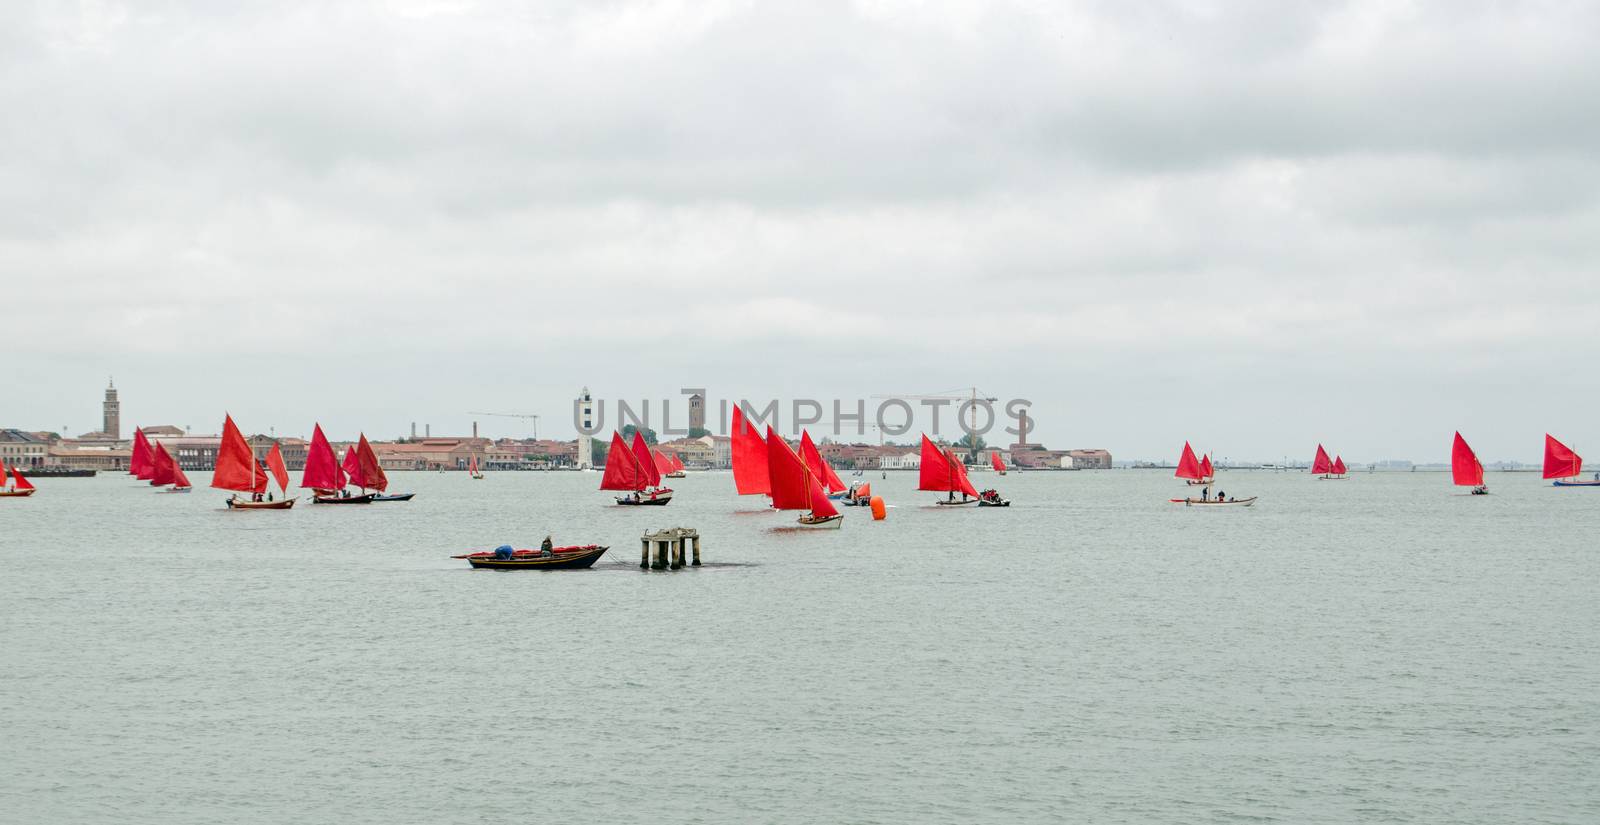 A regatta of Venetian sailing boats, all sporting red painted sails, on the lagoon near Murano.  Part of the Red Regatta event organised by artist Melissa McGill on an overcast afternoon in May, Venice.